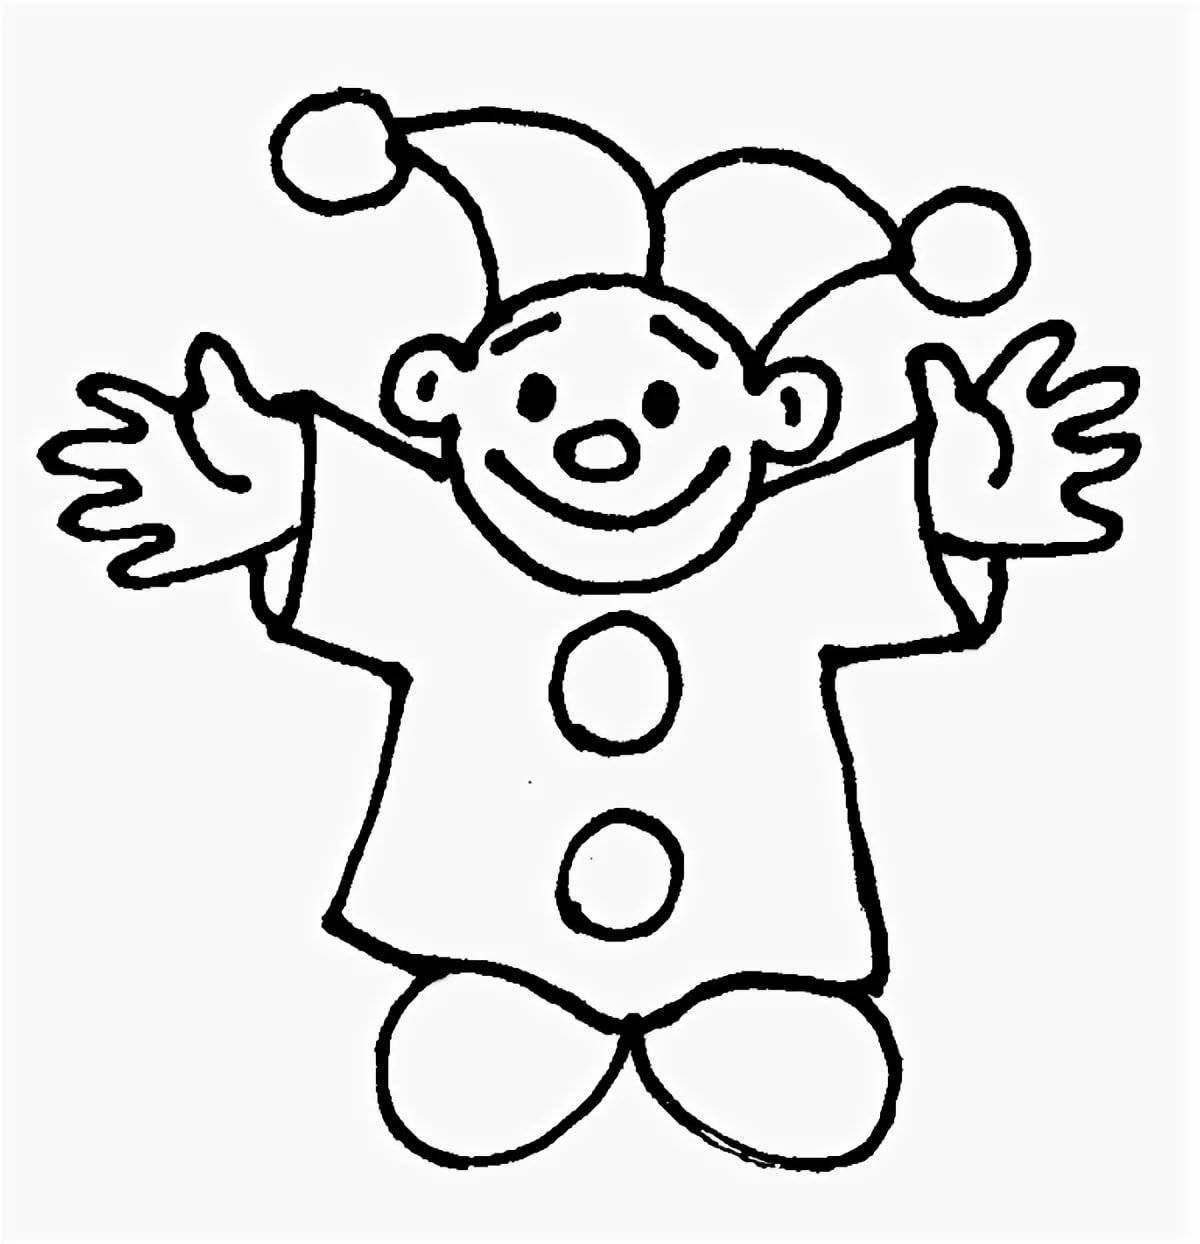 Colorful parsley coloring page for 3-4 year olds